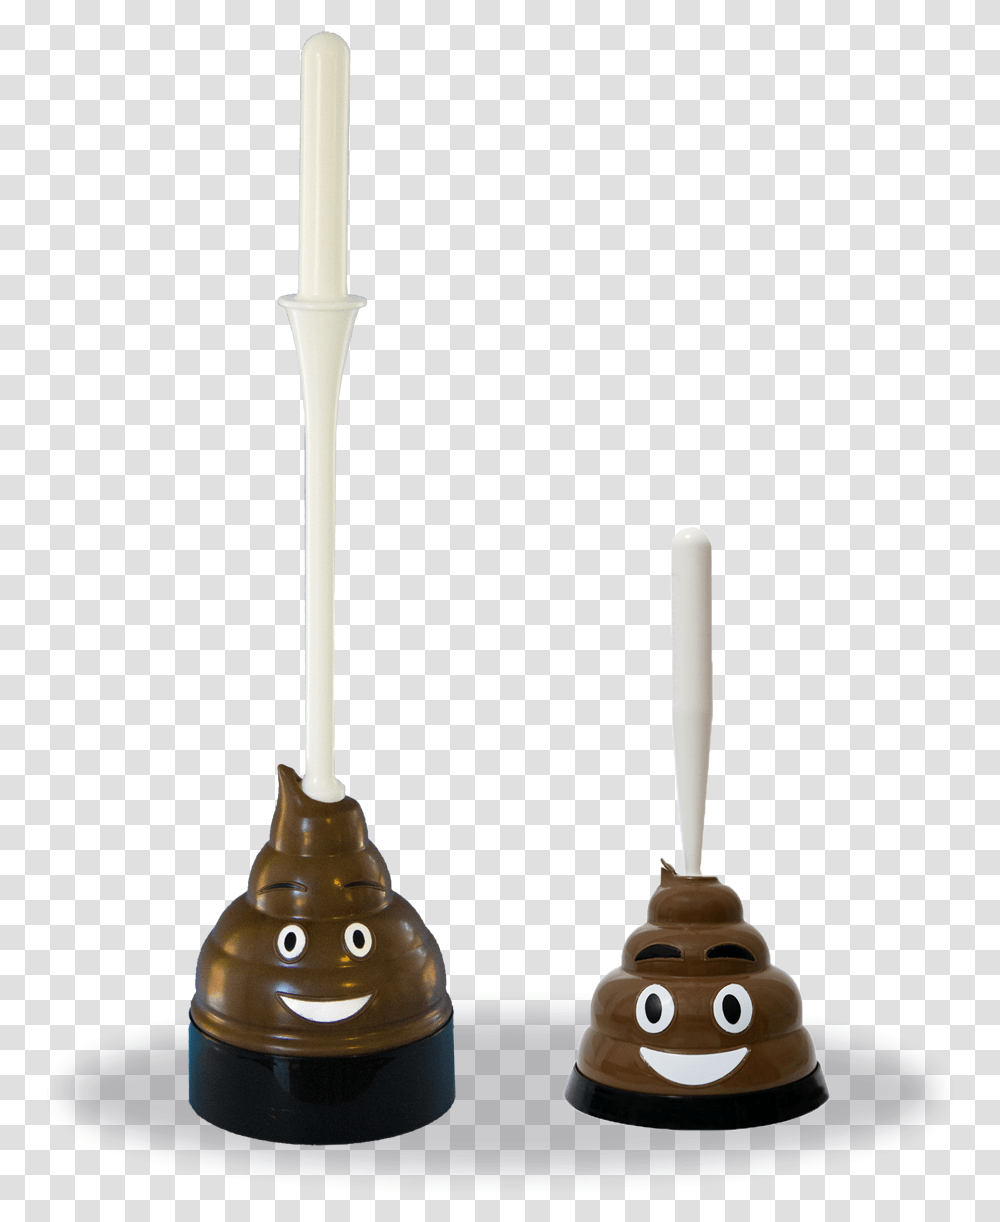 Mister Poop Products That Make People Smile Chocolate, Food, Weapon, Weaponry Transparent Png